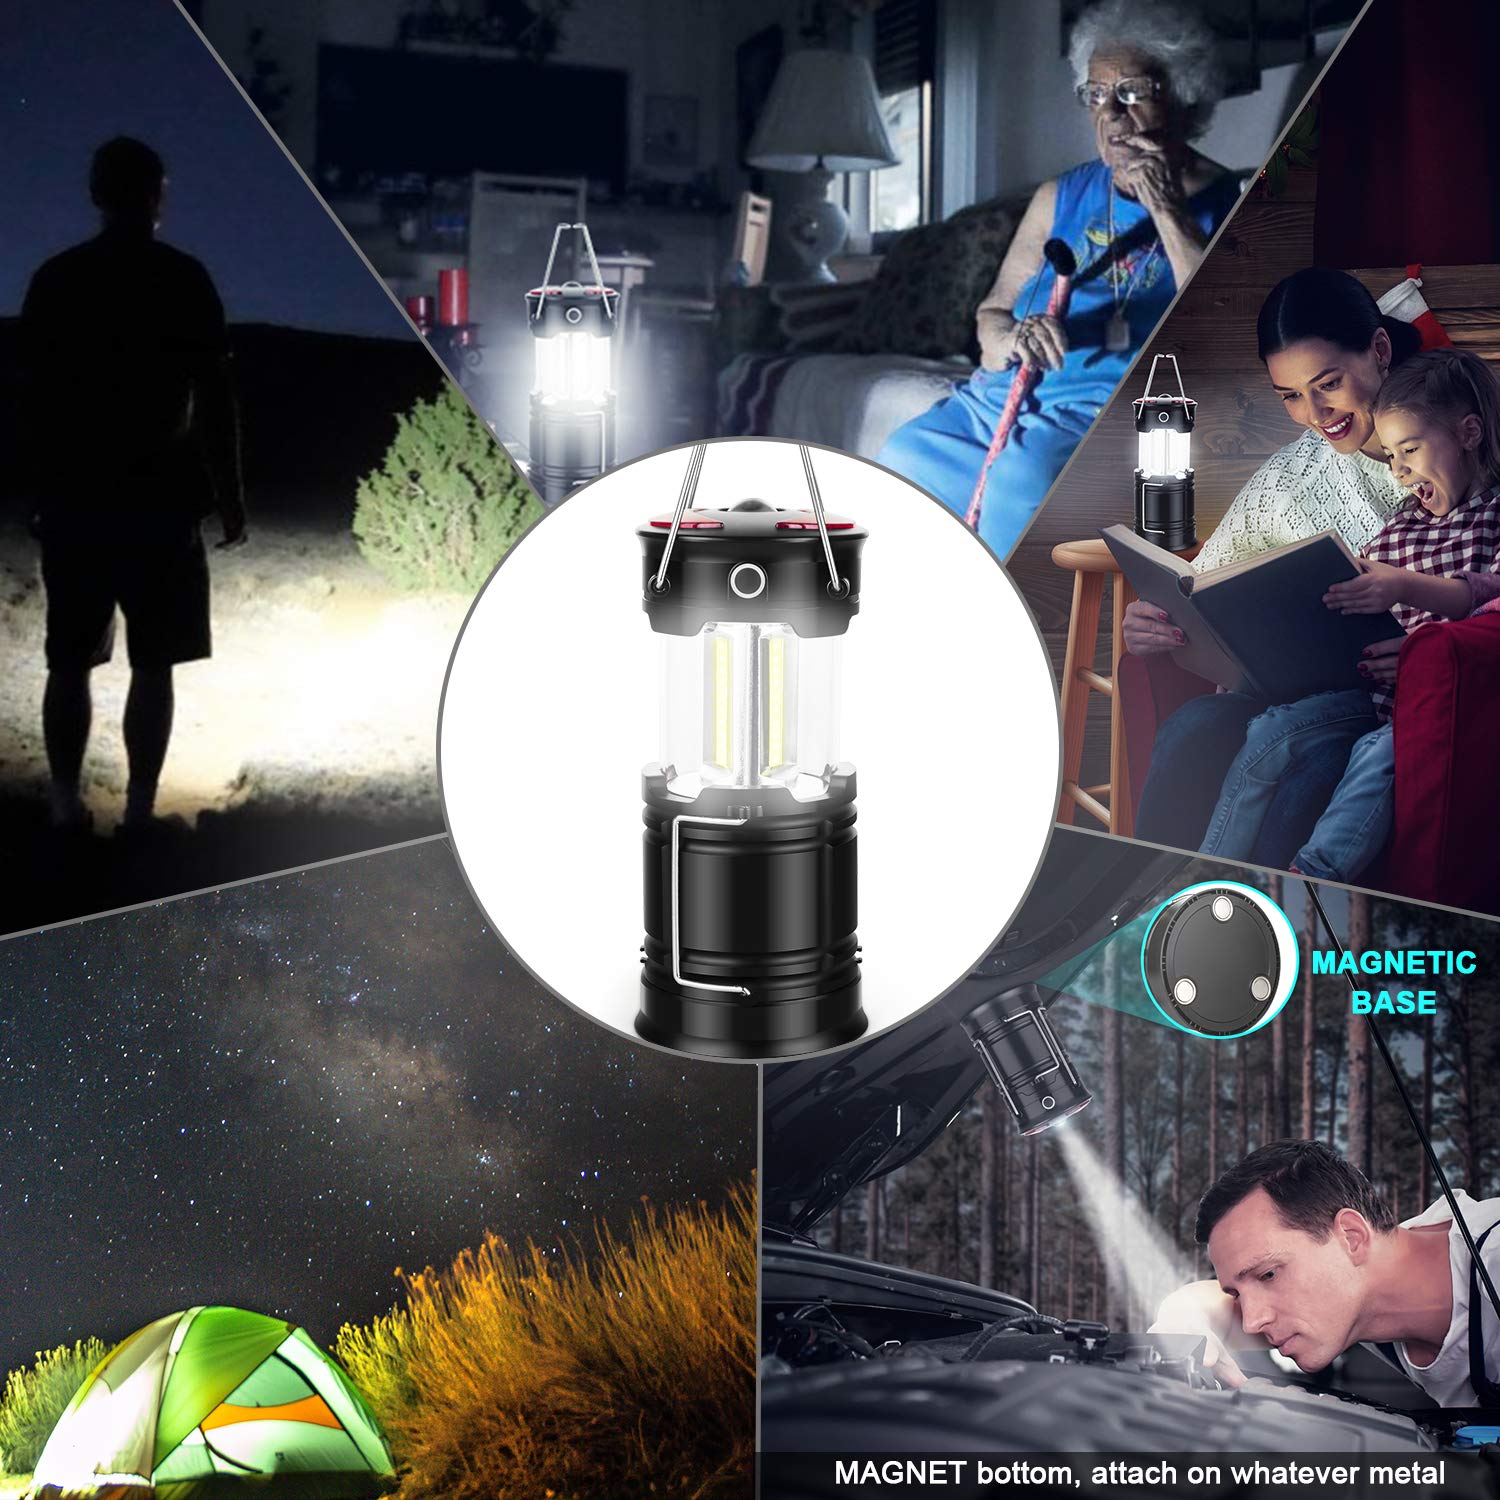 4 Pack Lantern Camping Essentials Lights, Led Flashlight for Power Outages, Tent Lights for Emergency, Survival Gear and Supplies for Hurricane, Rechargeable and Battery Powered Operated Lamp